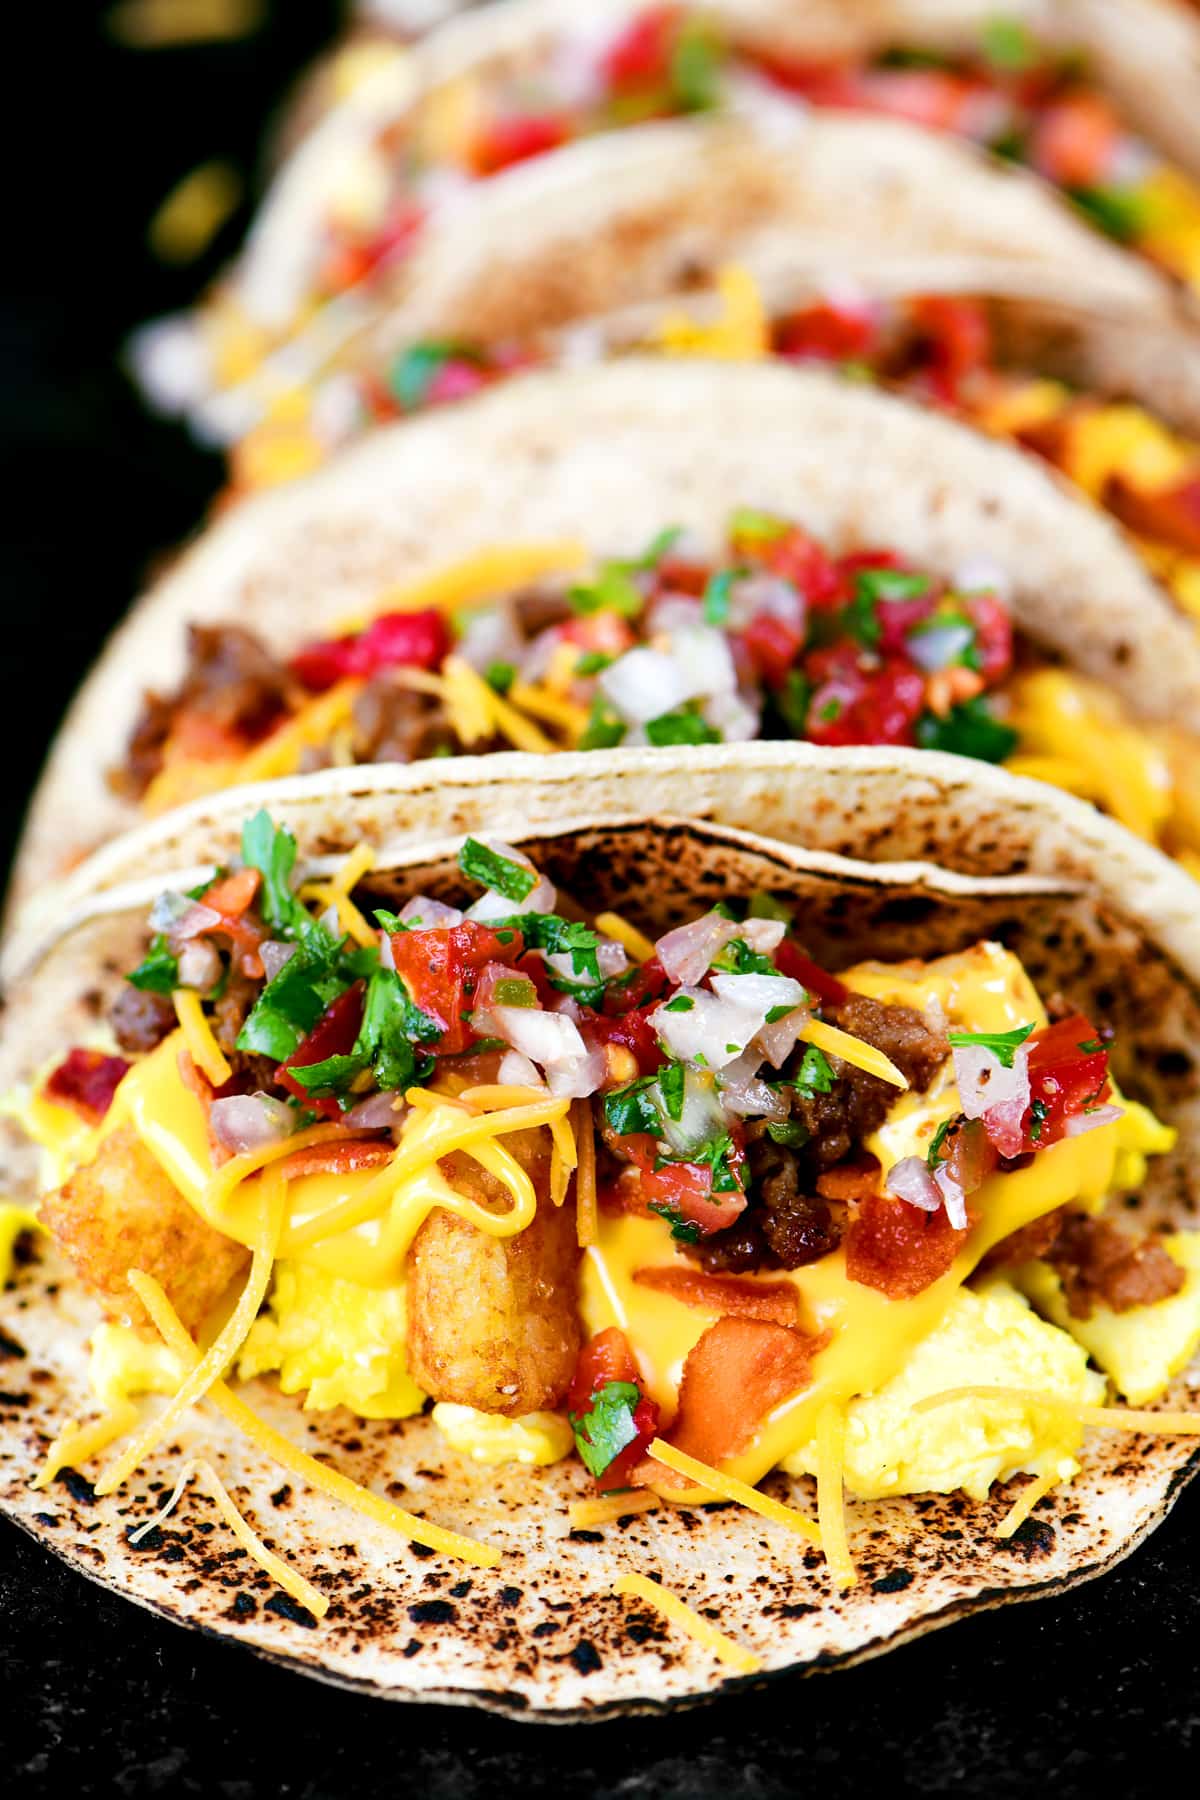 a close up view of a breakfast taco.